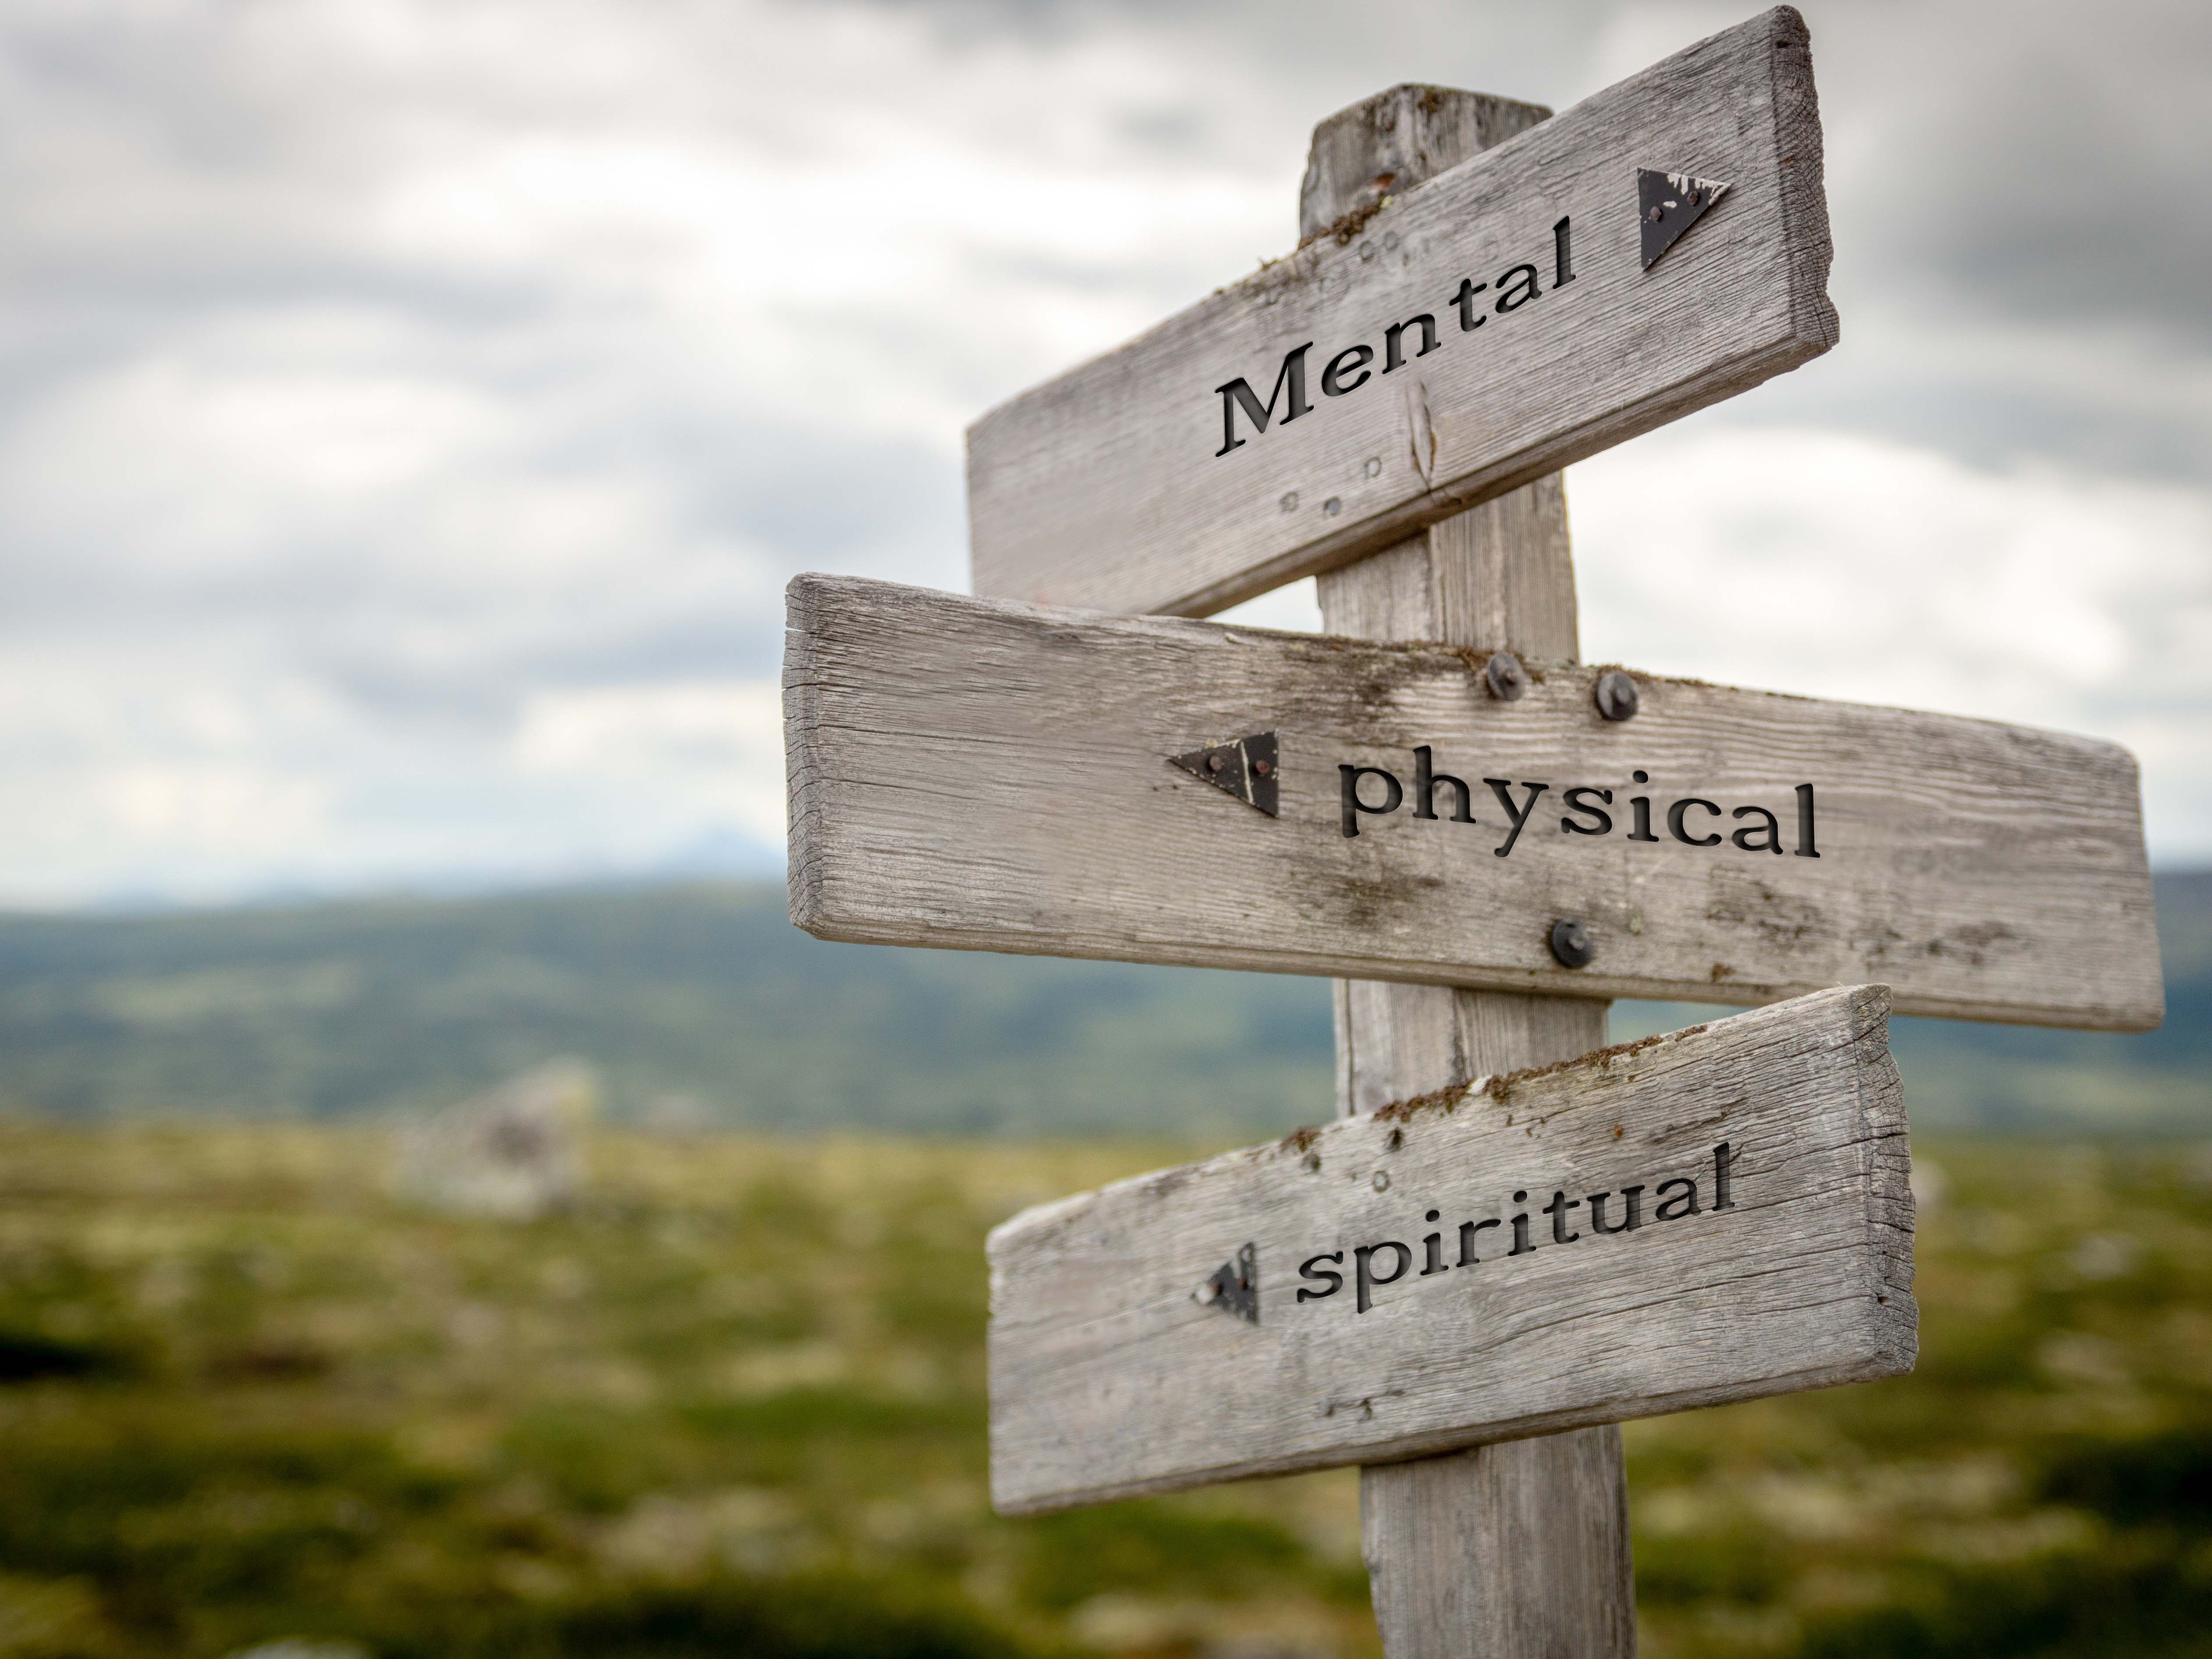 mental physical spiritual quote text on wooden signpost outdoors in nature